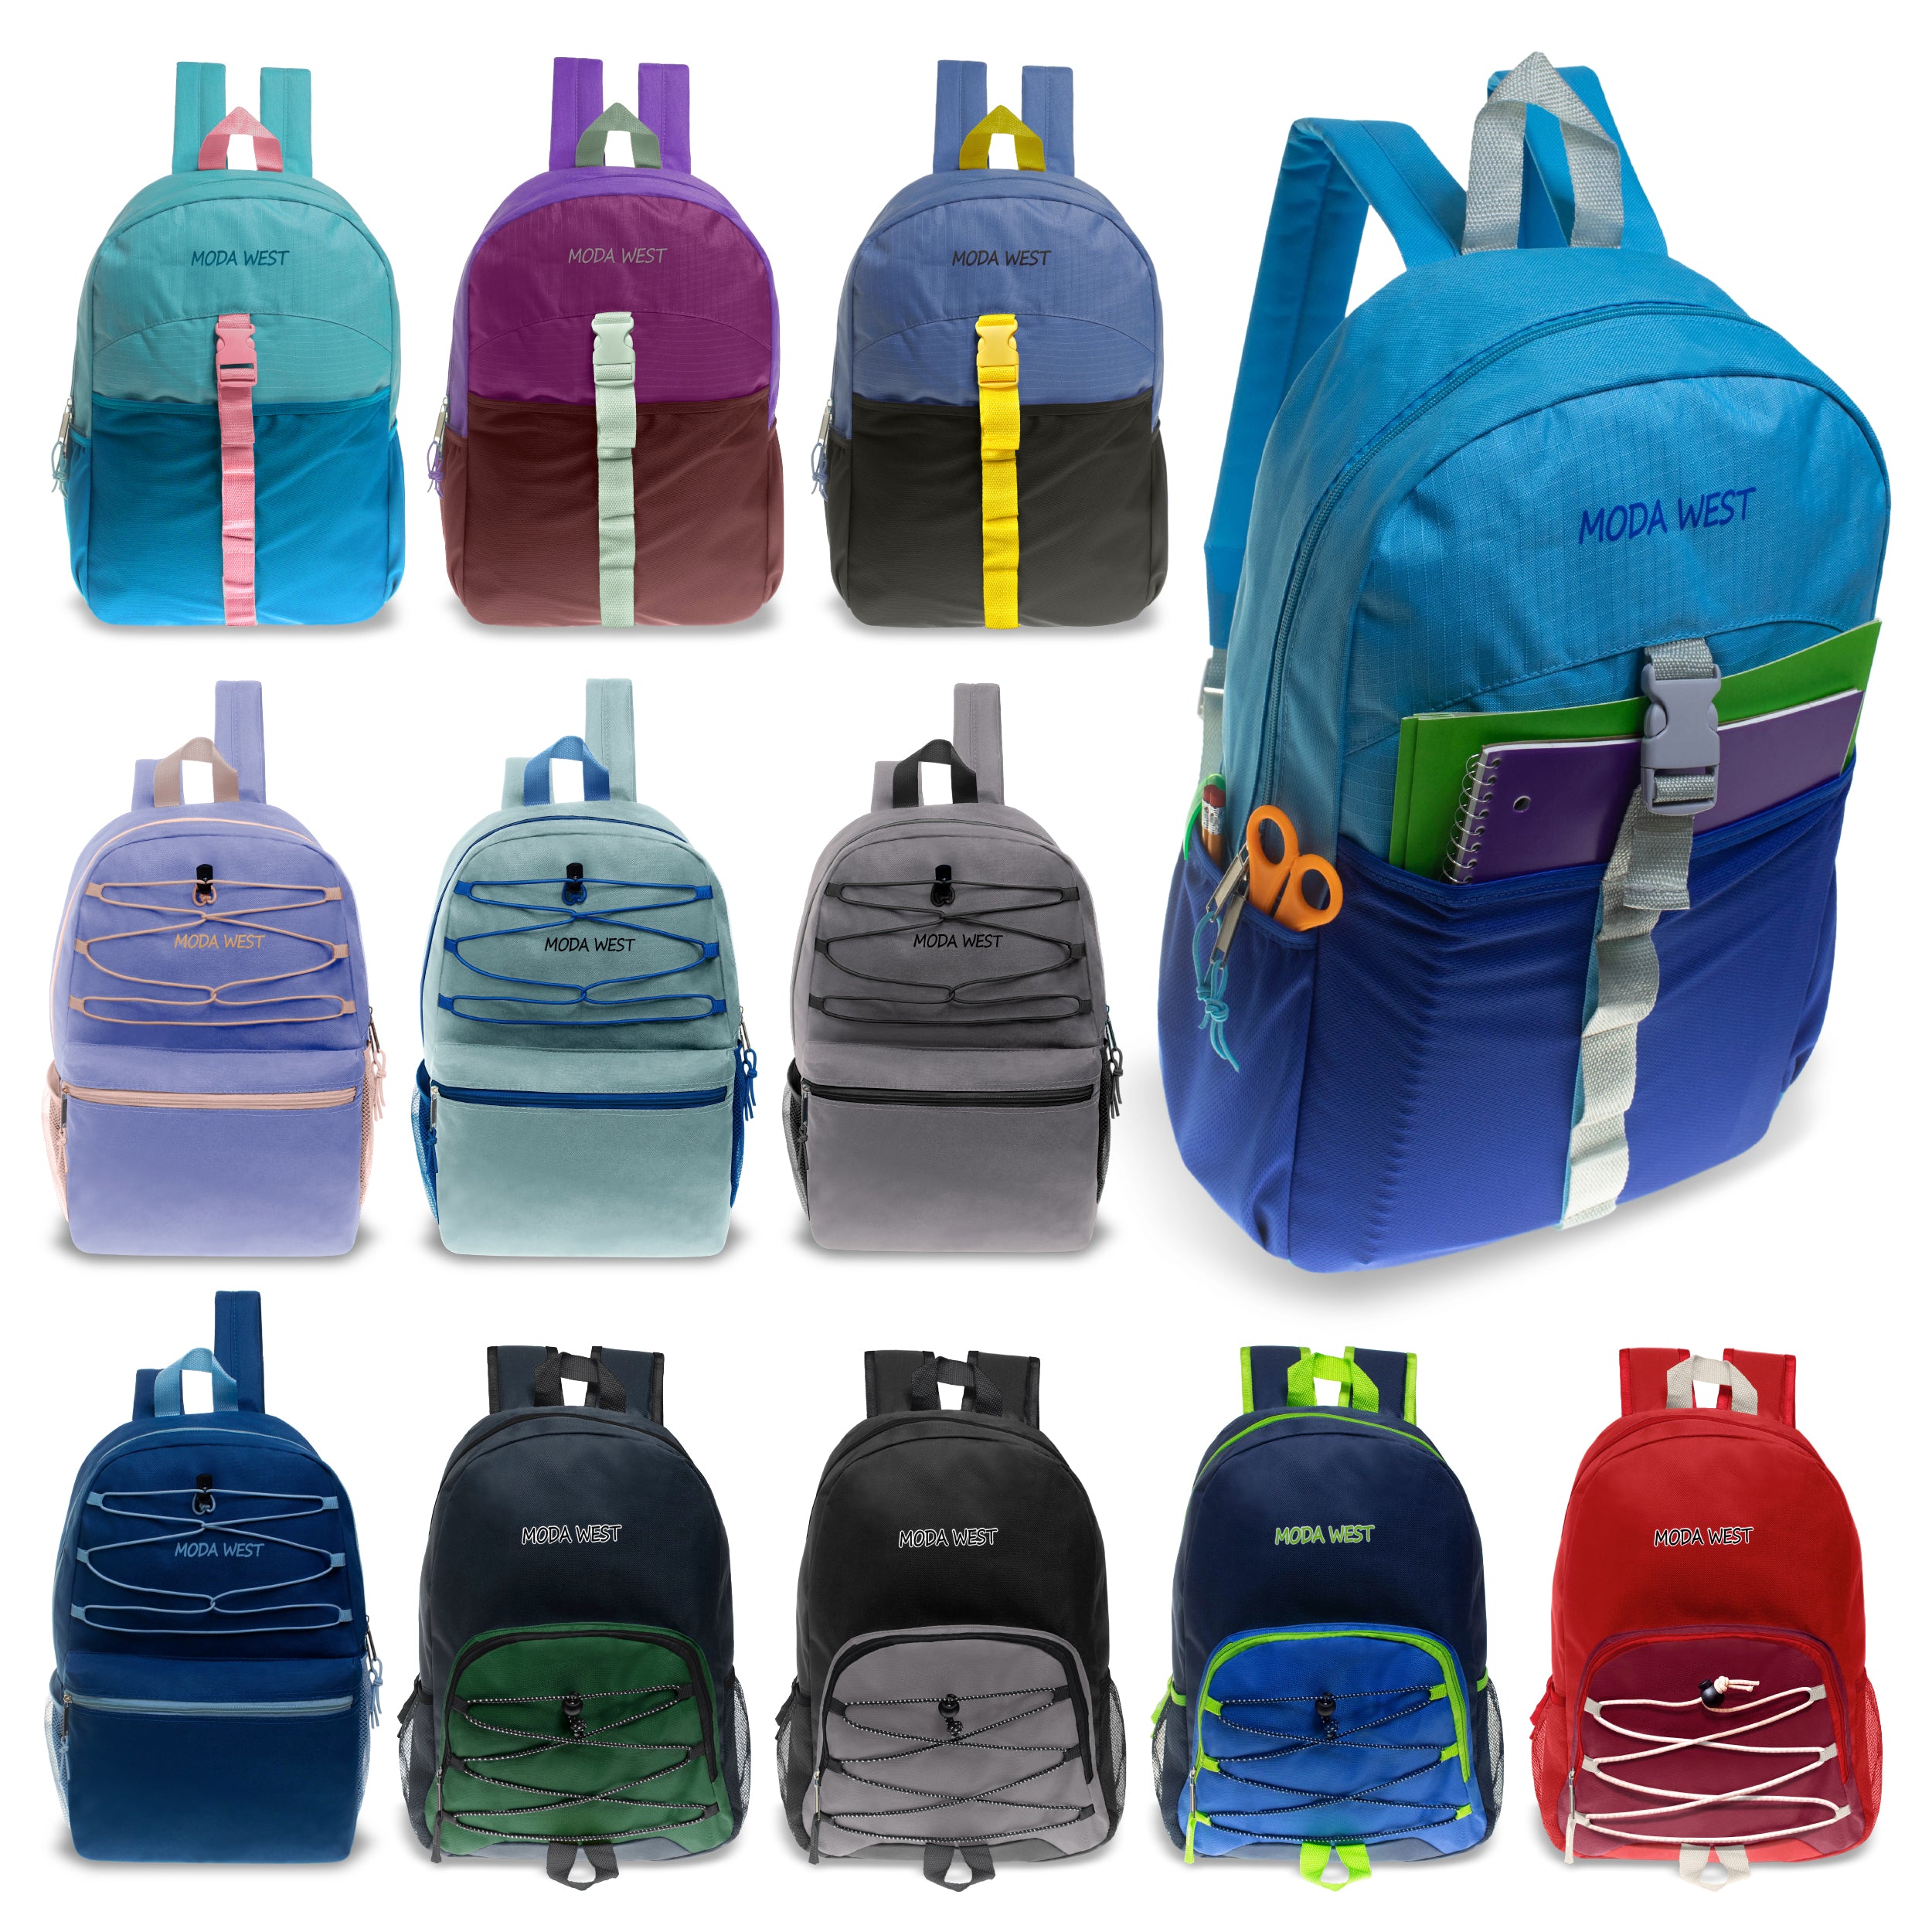 wholesale 17 inch backpacks in 3 different styles